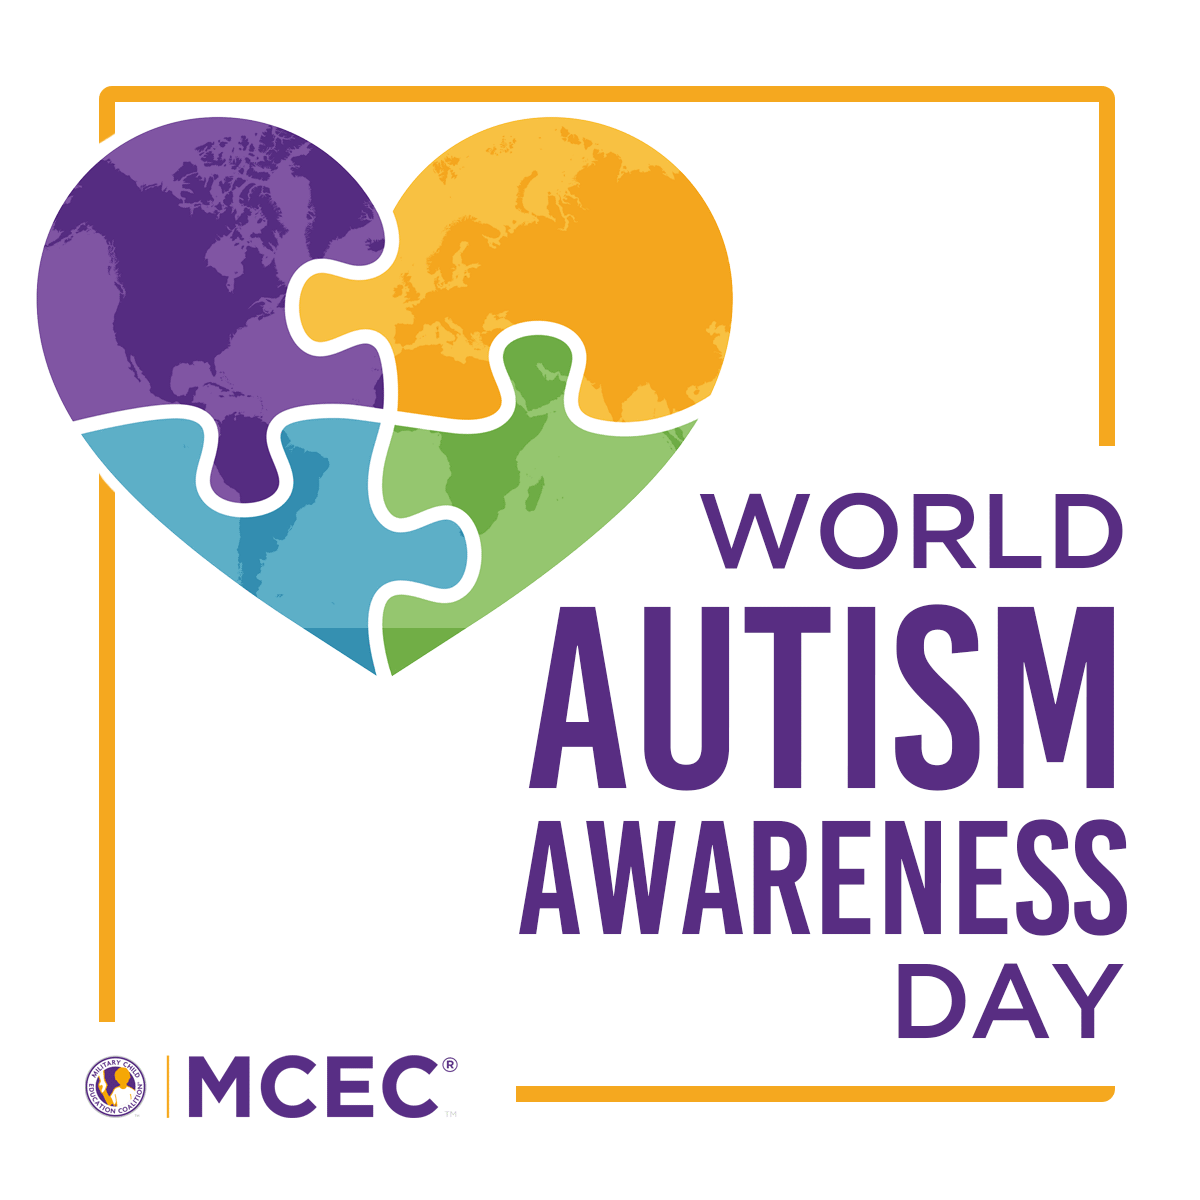 Embracing diversity and making the world a better place, one act of kindness at a time. #WorldAutismAwarenessDay #LightItUpBlue